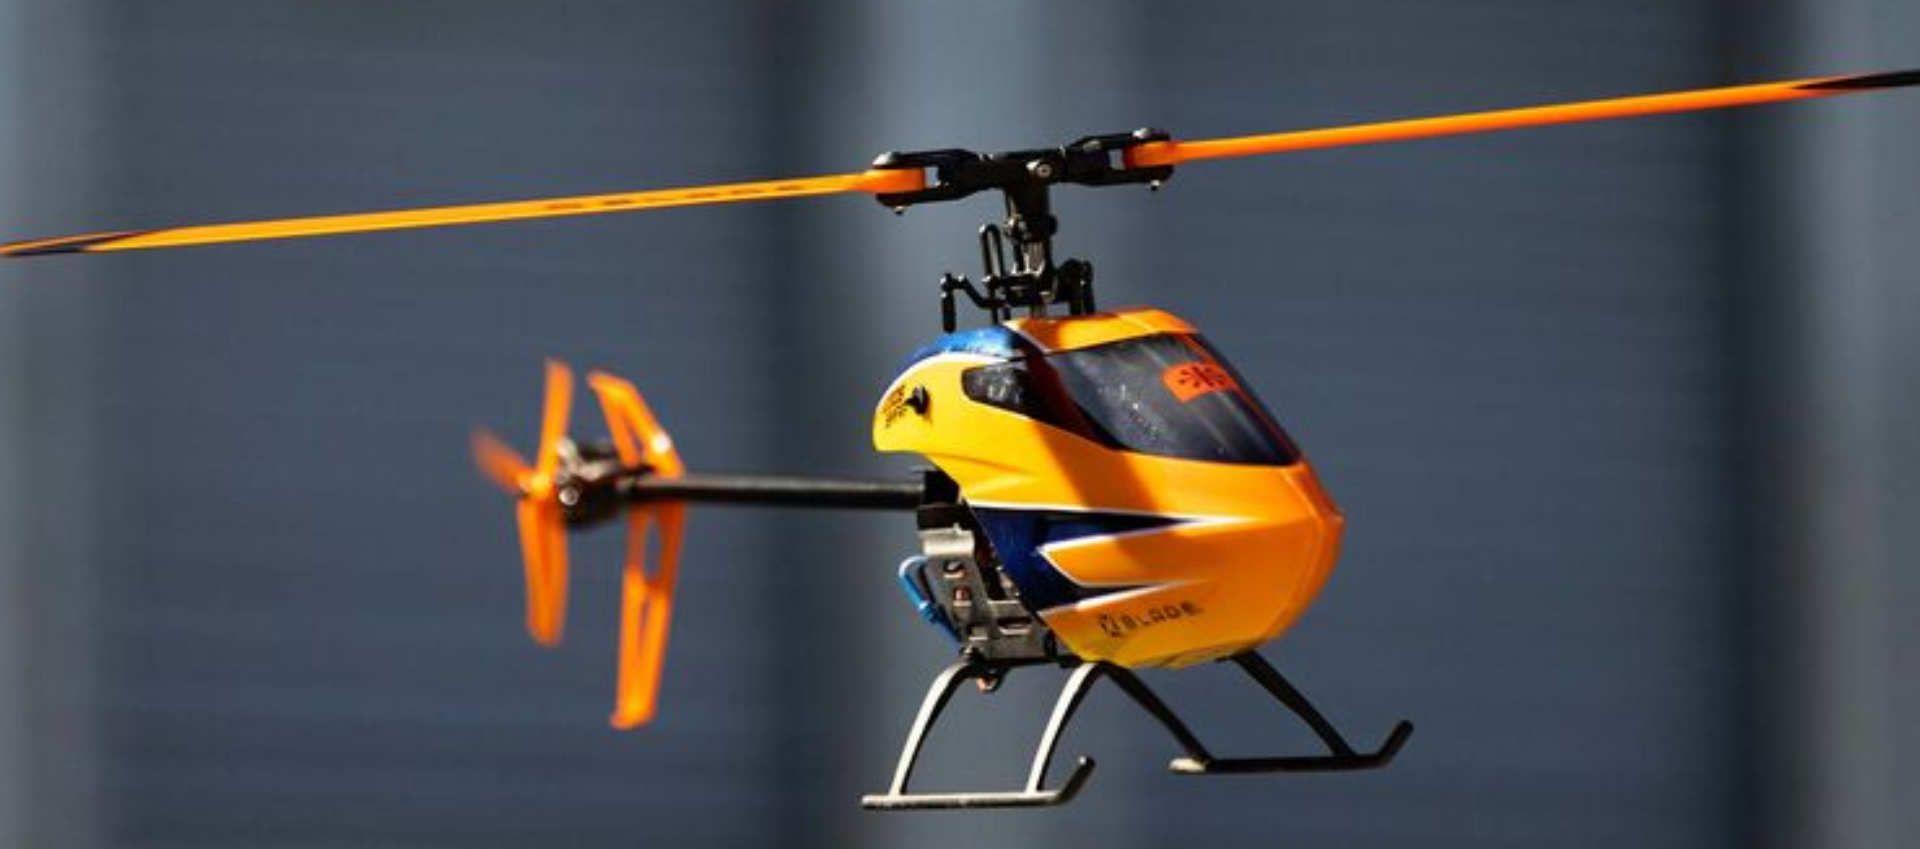 Best Mini Helicopter Rc: Top mini helicopter RC options for all experience levels.